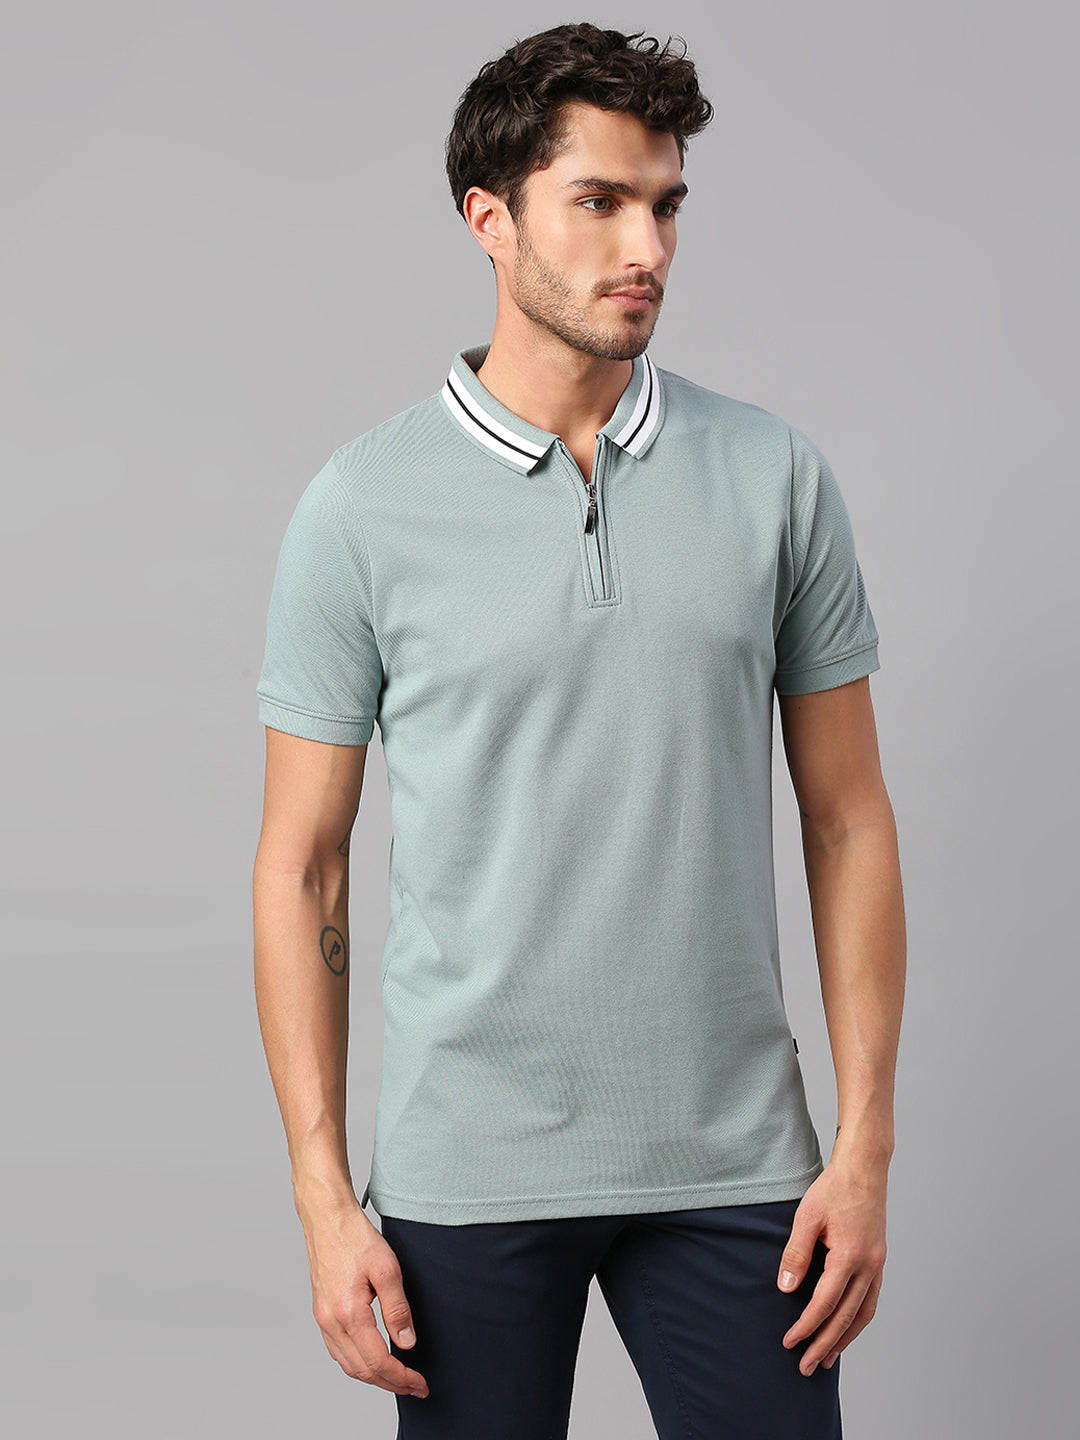 Men's Pure Cotton Solid Half Sleeves Polo T-Shirt (Powder Blue ...